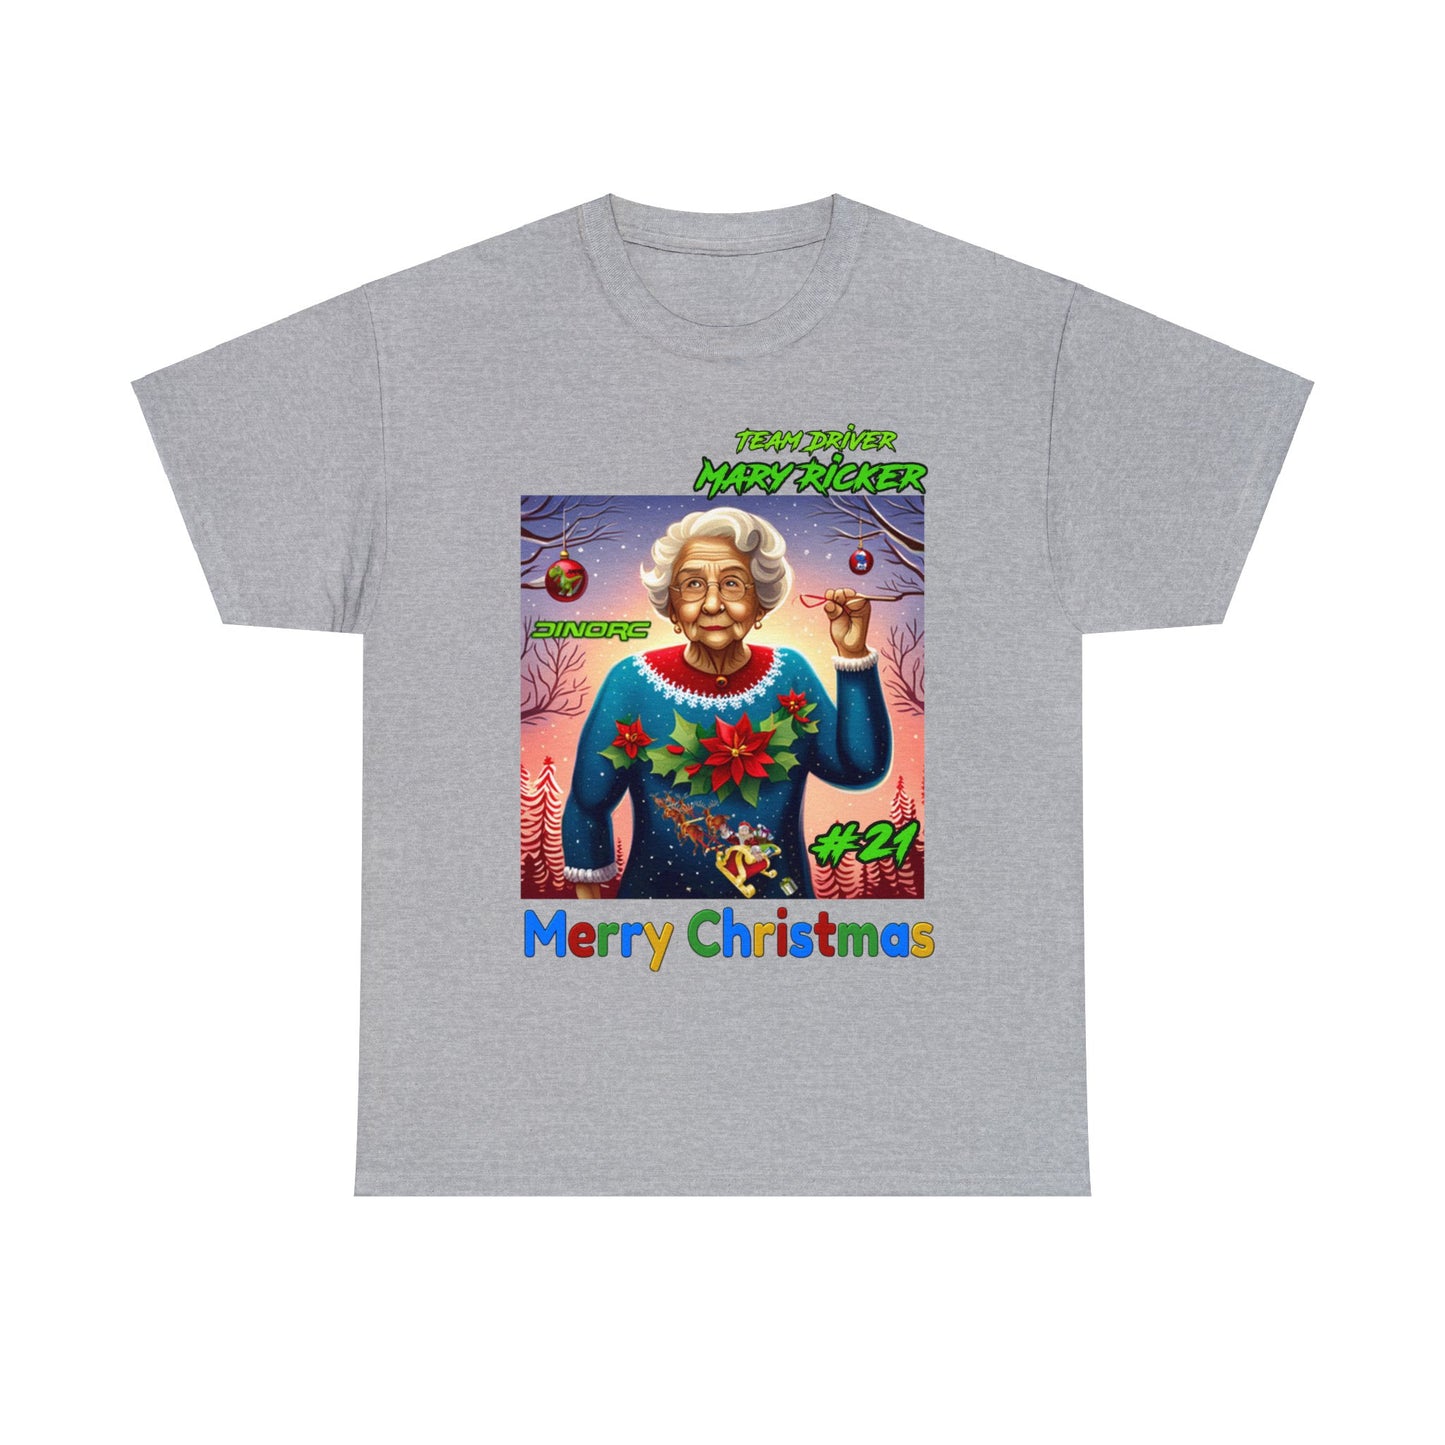 Mary Ricker Ugly Christmas DinoRC Logo Front T-Shirt 10 colors  S-5x